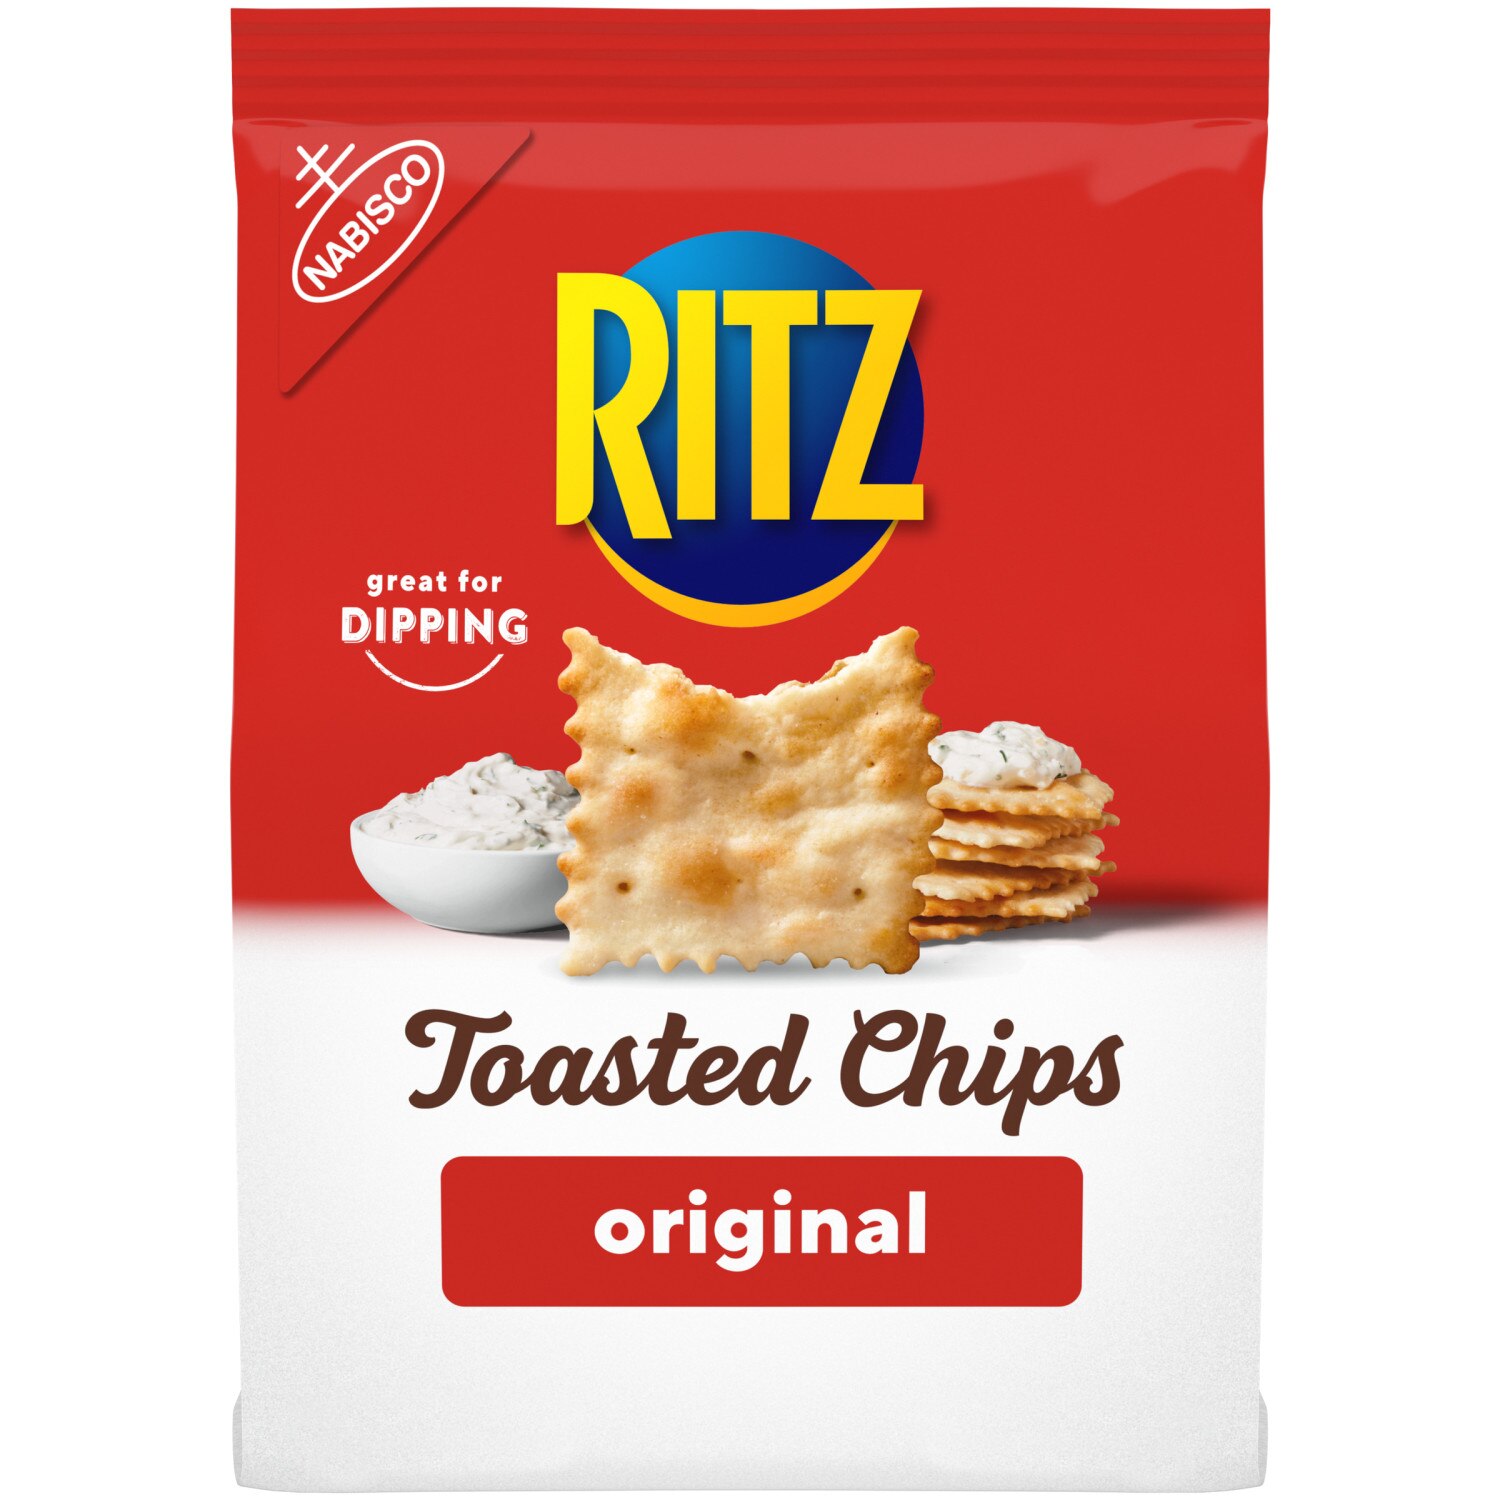 RITZ Toasted Chips Original Crackers, 8.1 oz